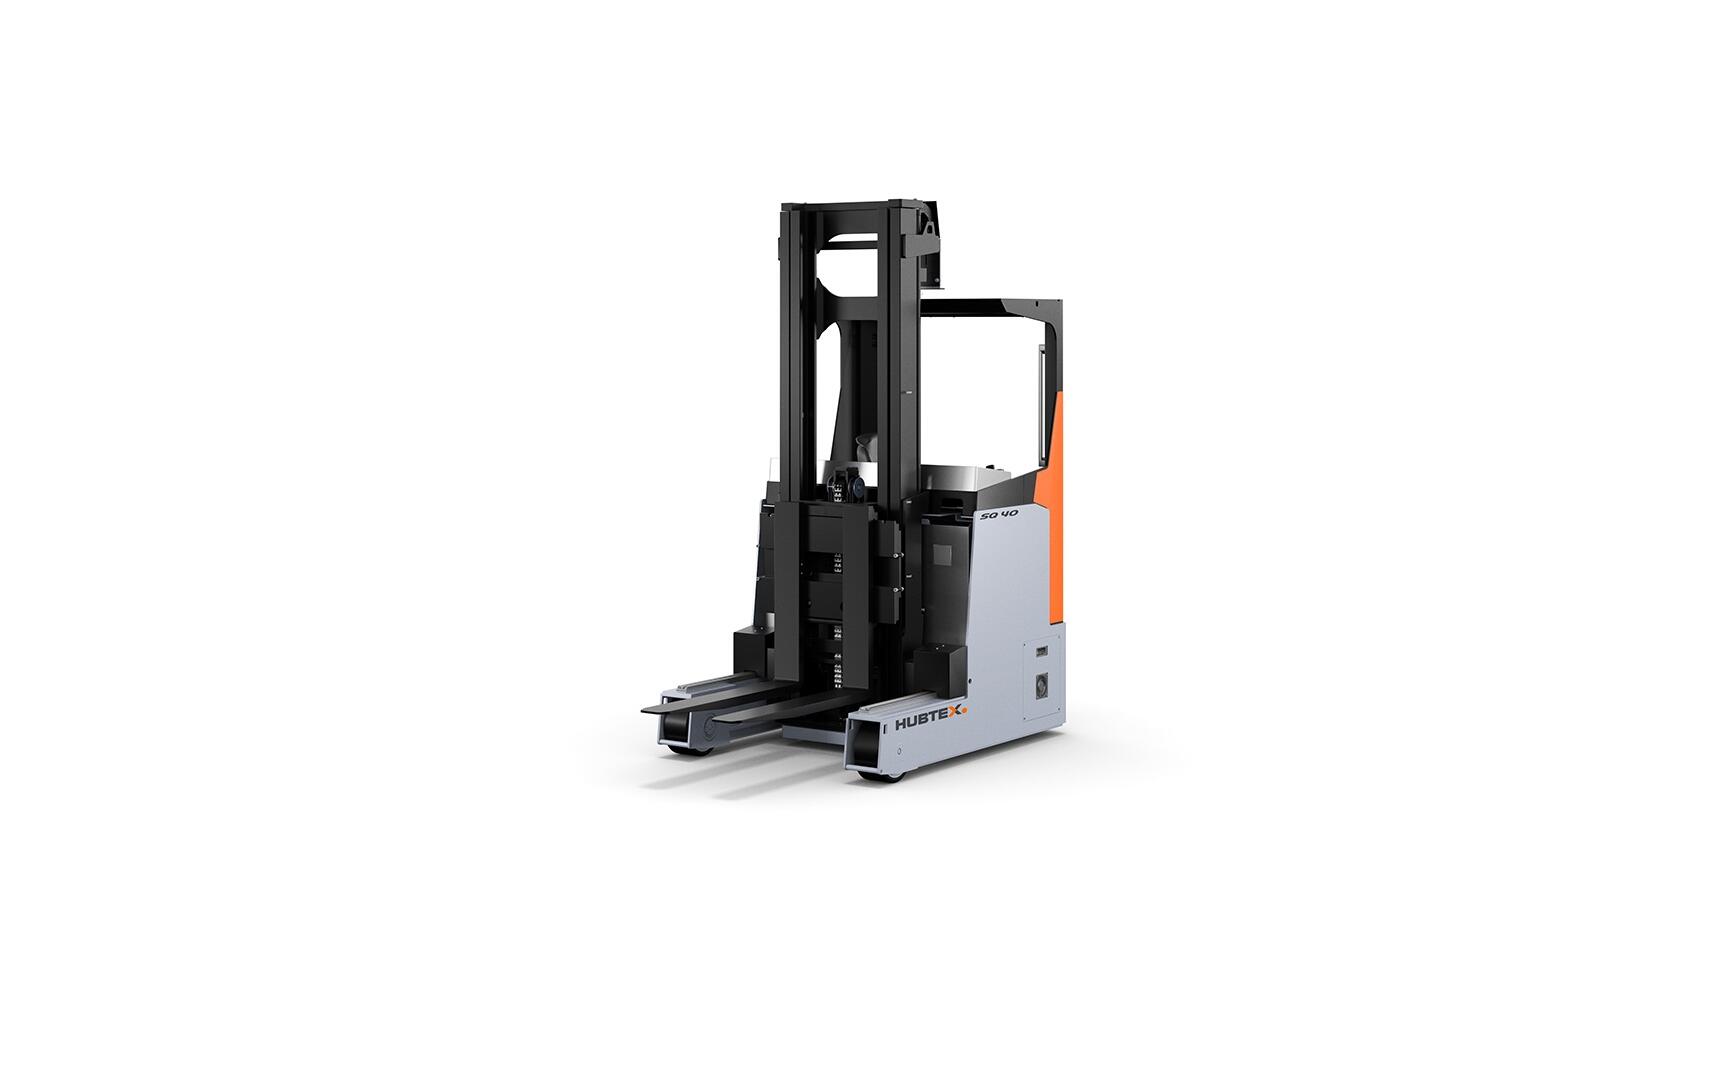 With the HUBTEX SQ 40 reach truck, high loads can be moved